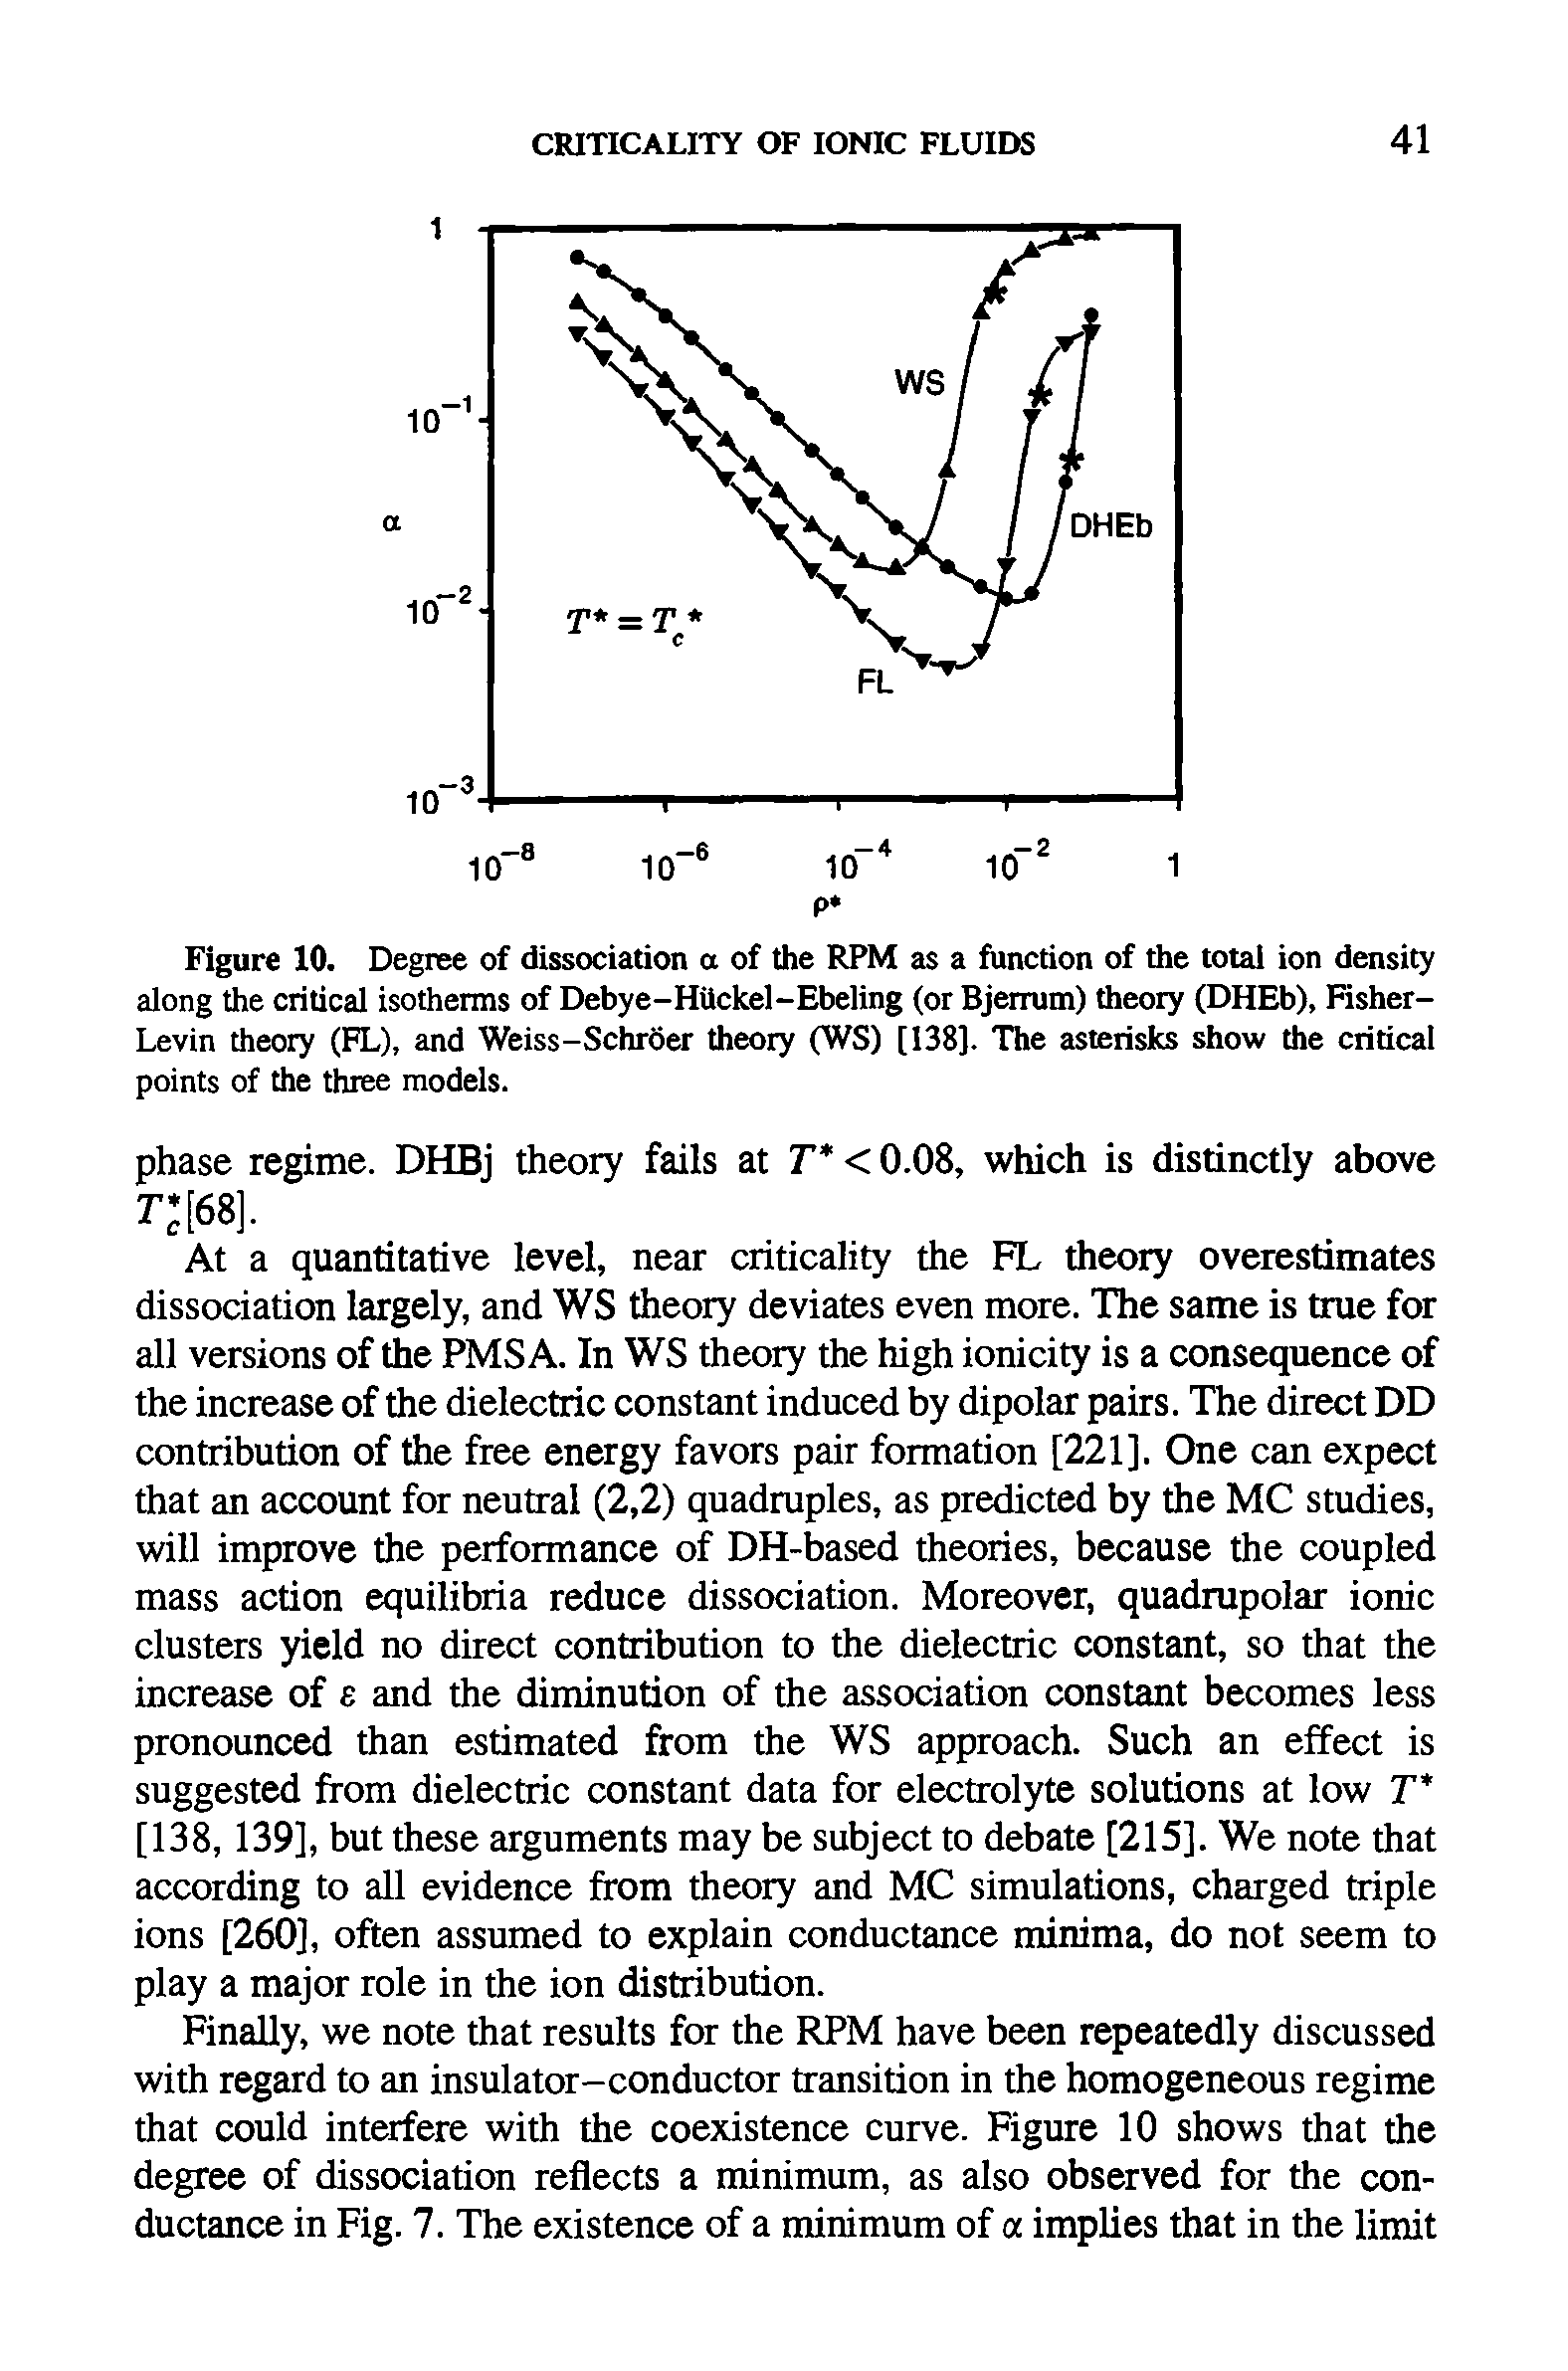 Figure 10. Degree of dissociation a of the RPM as a function of the total ion density along the critical isotherms of Debye-Httckel-Ebeling (or Bjerrum) theory (DHEb), Fisher-Levin theory (FL), and Weiss-Schroer theory (WS) [138]. The asterisks show the critical points of the three models.